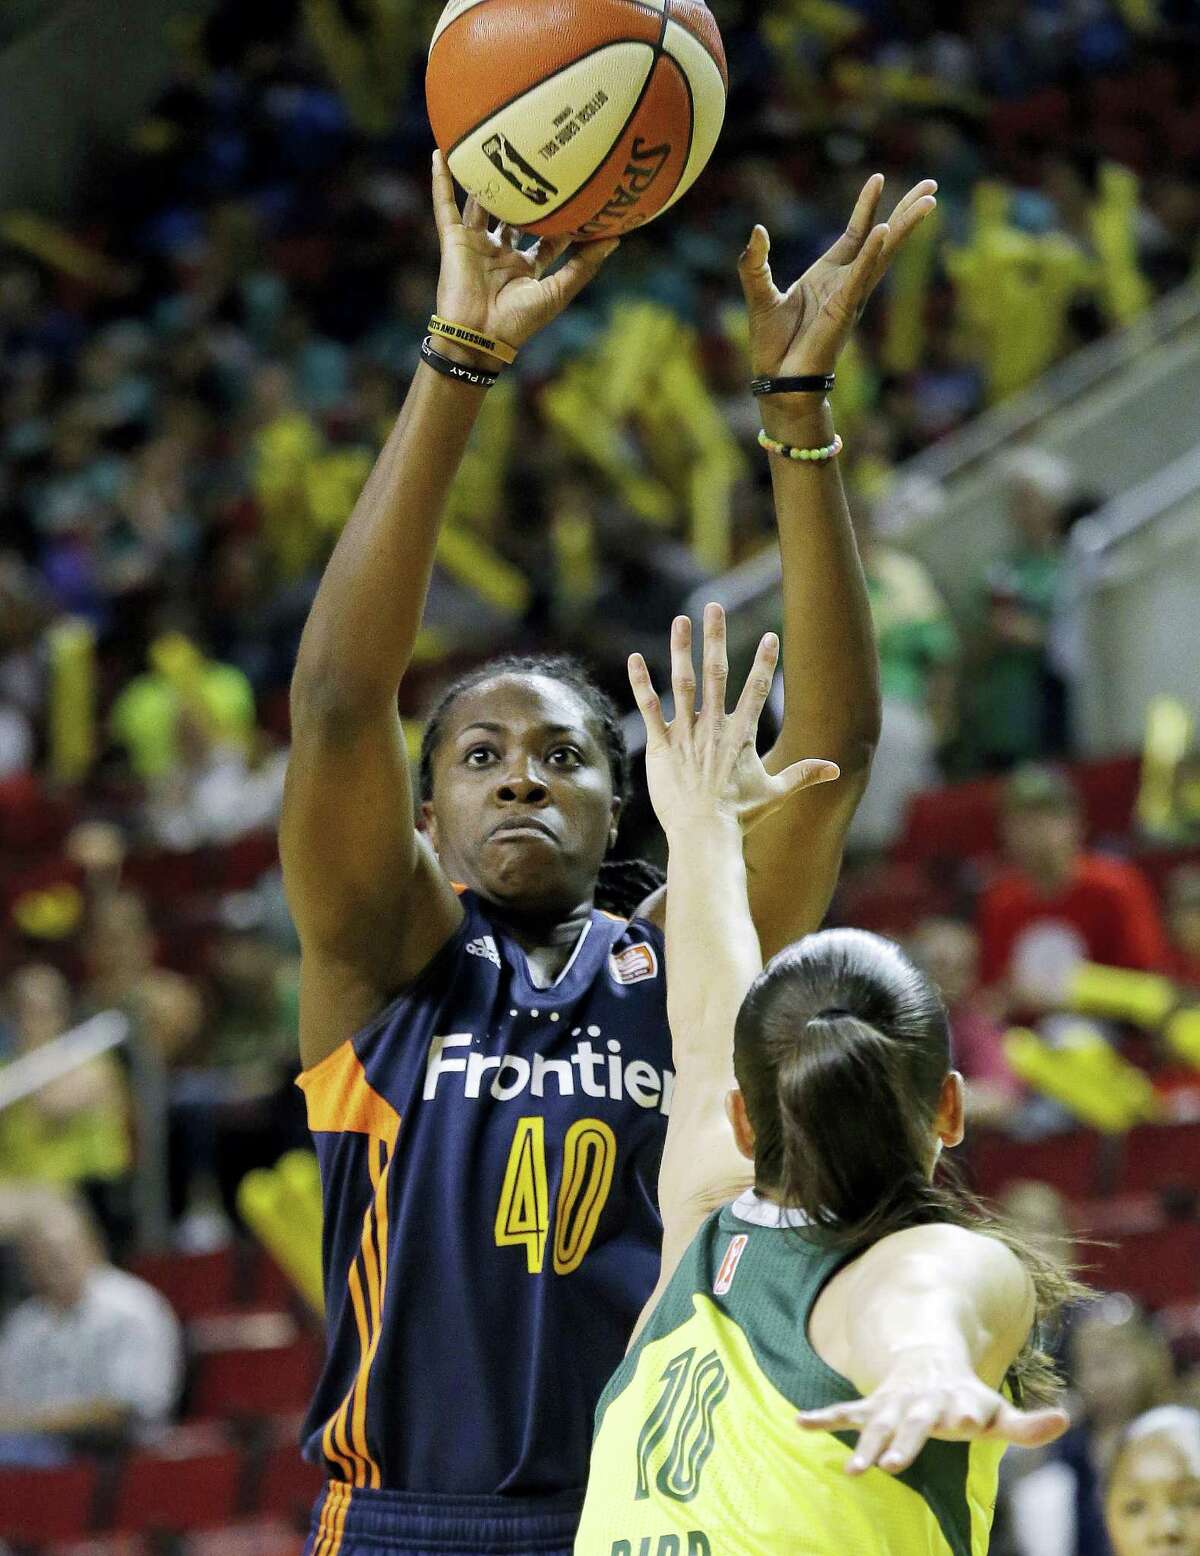 The Sun’s Shekinna Stricklen shoots over the Storm’s Sue Bird in the first half on Wednesday.